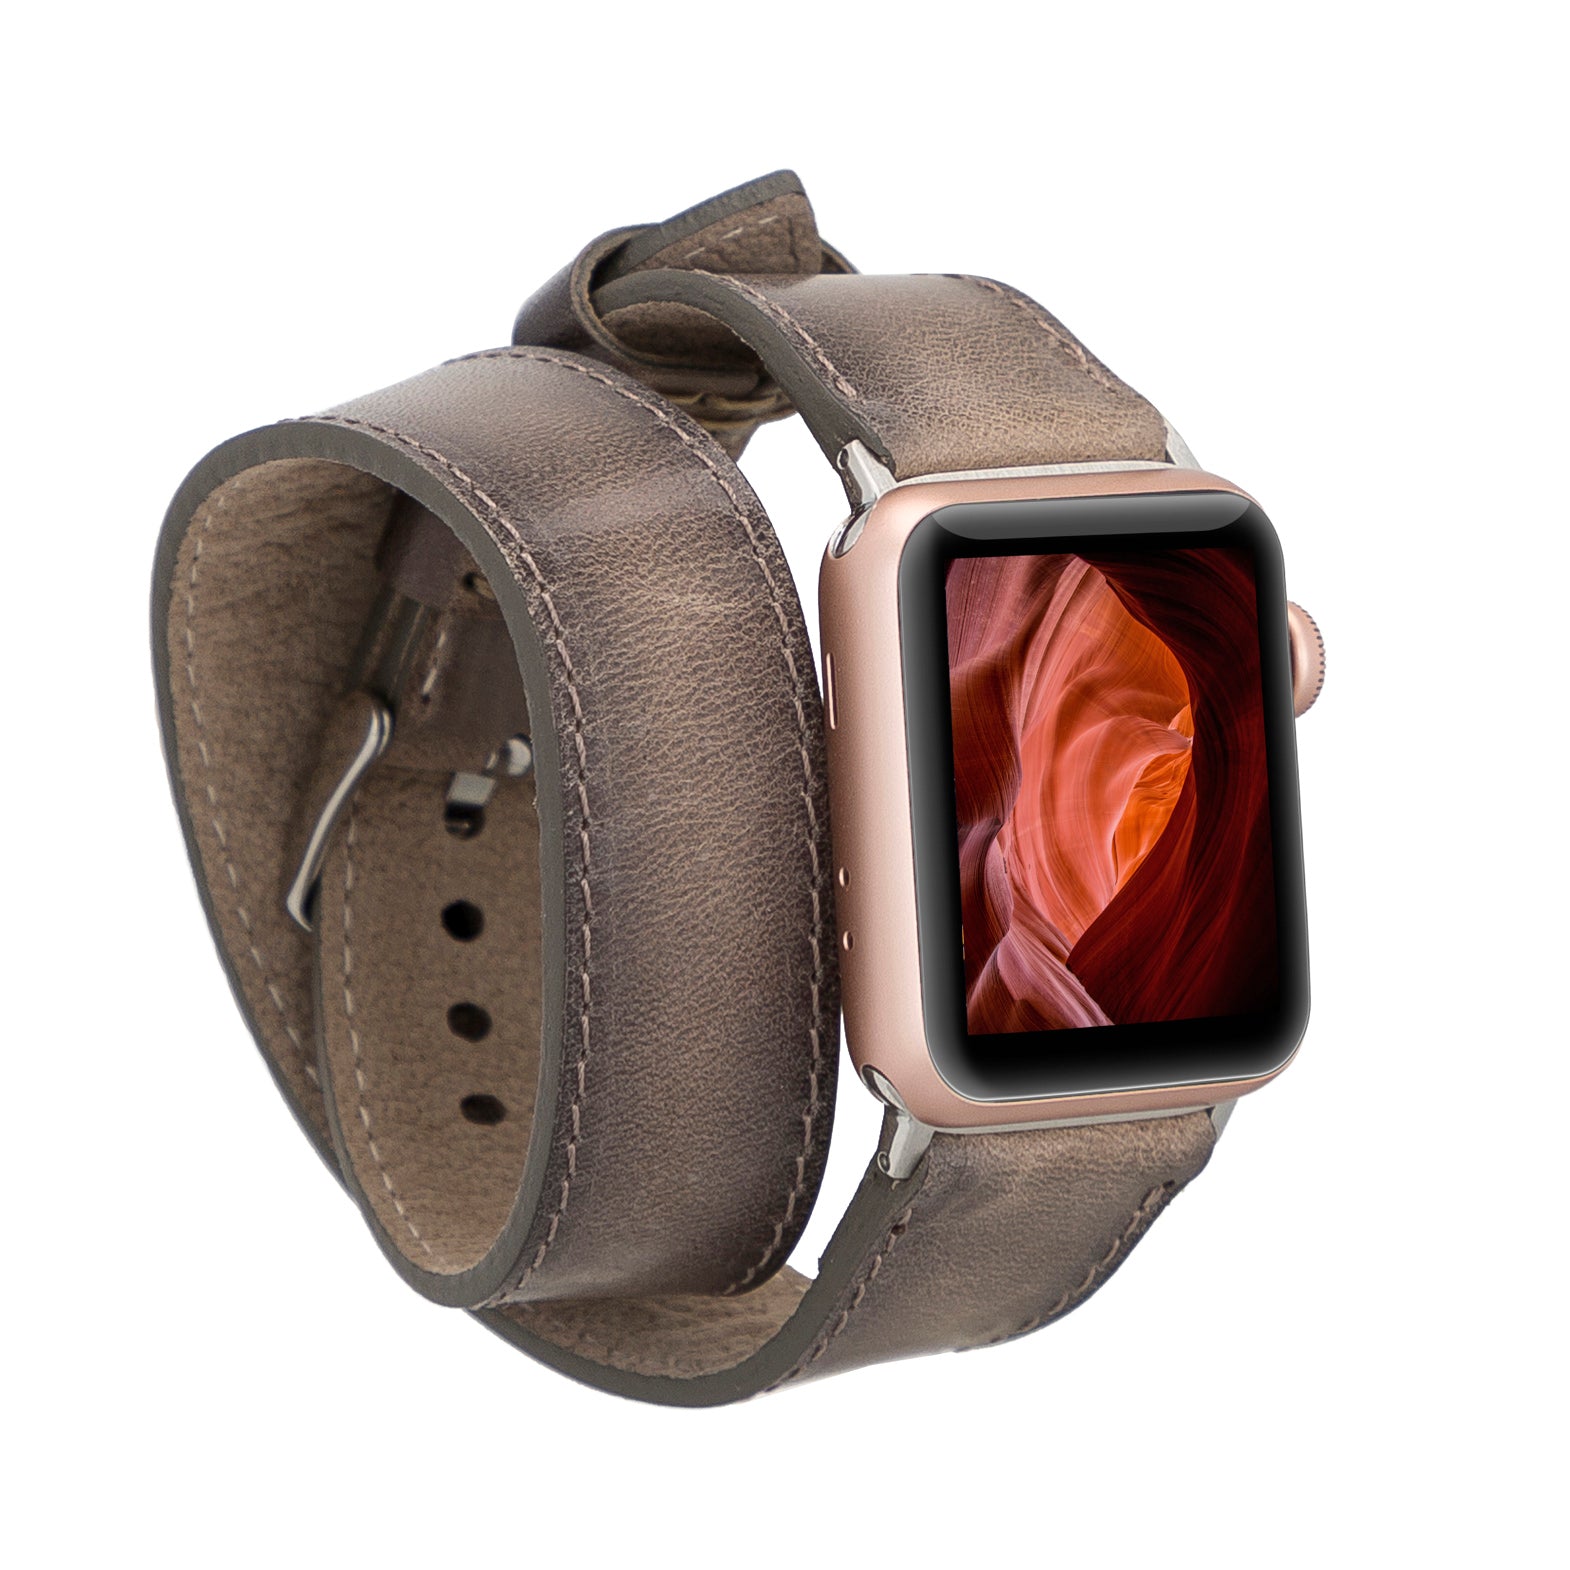 Double Tour Strap: Full Grain Leather Band for Apple Watch - GRAY